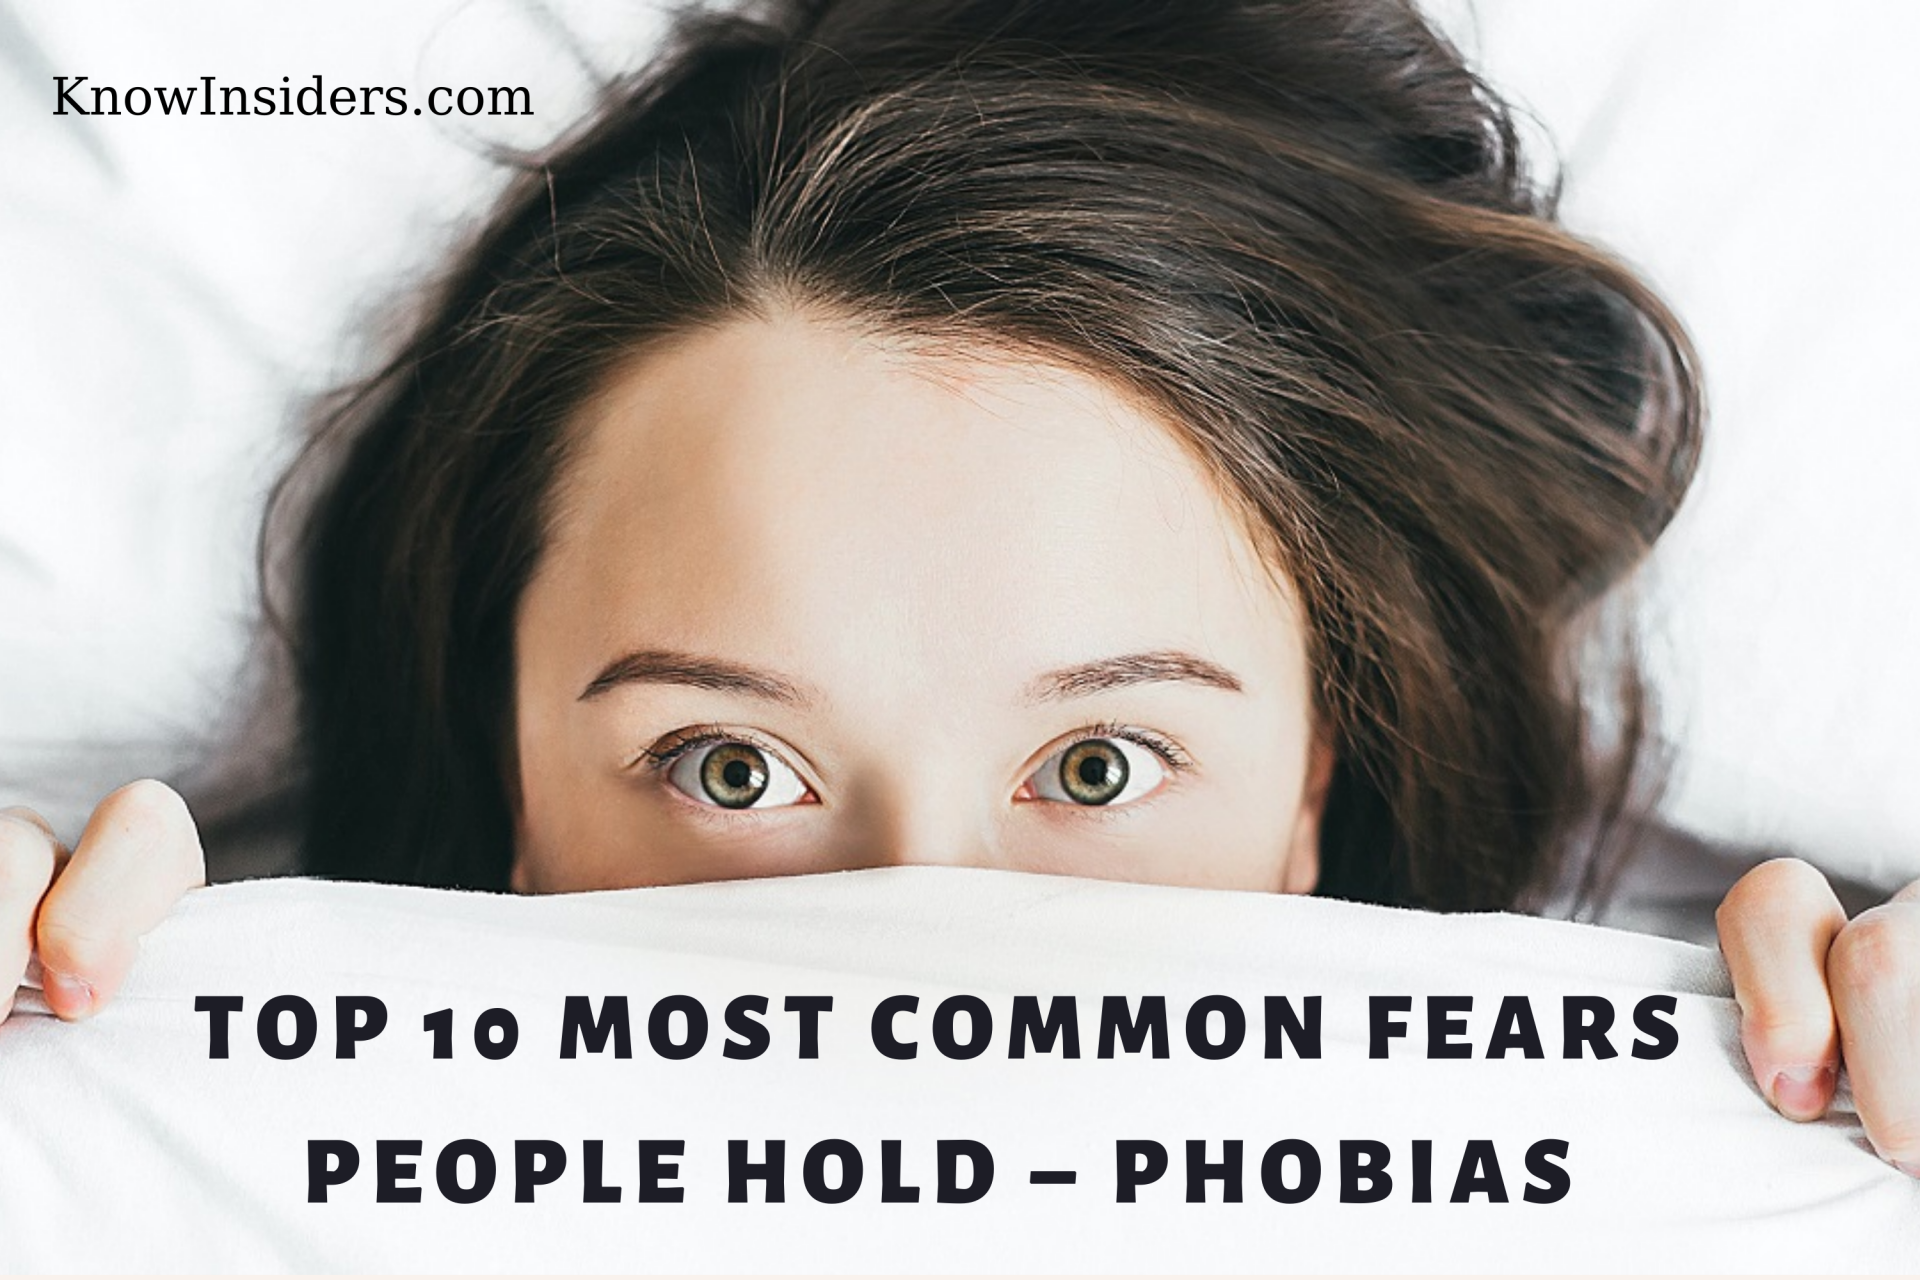 phobias top 10 most common fears people hold